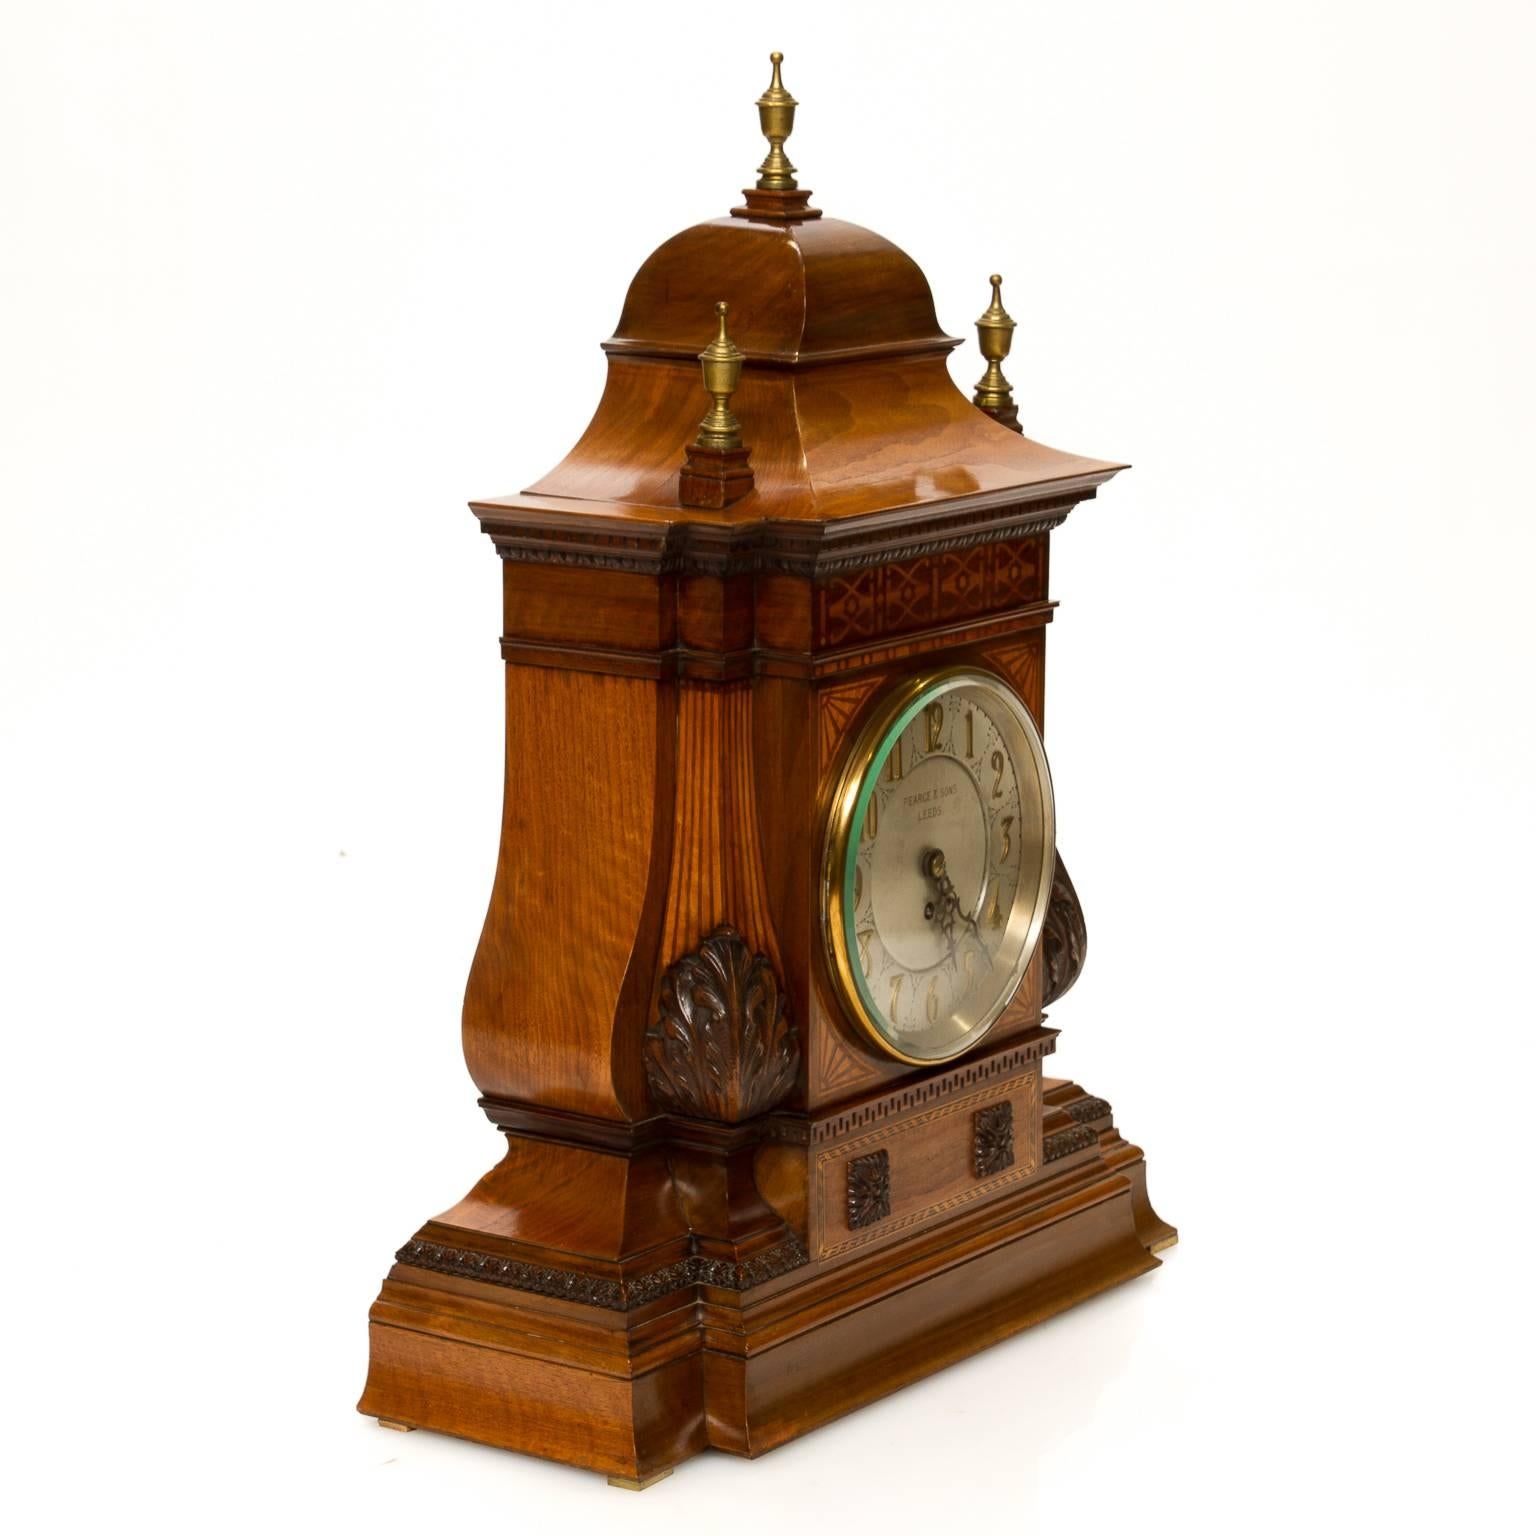 A large English inlaid and carved case mantle clock with a fusée movement. Signed 